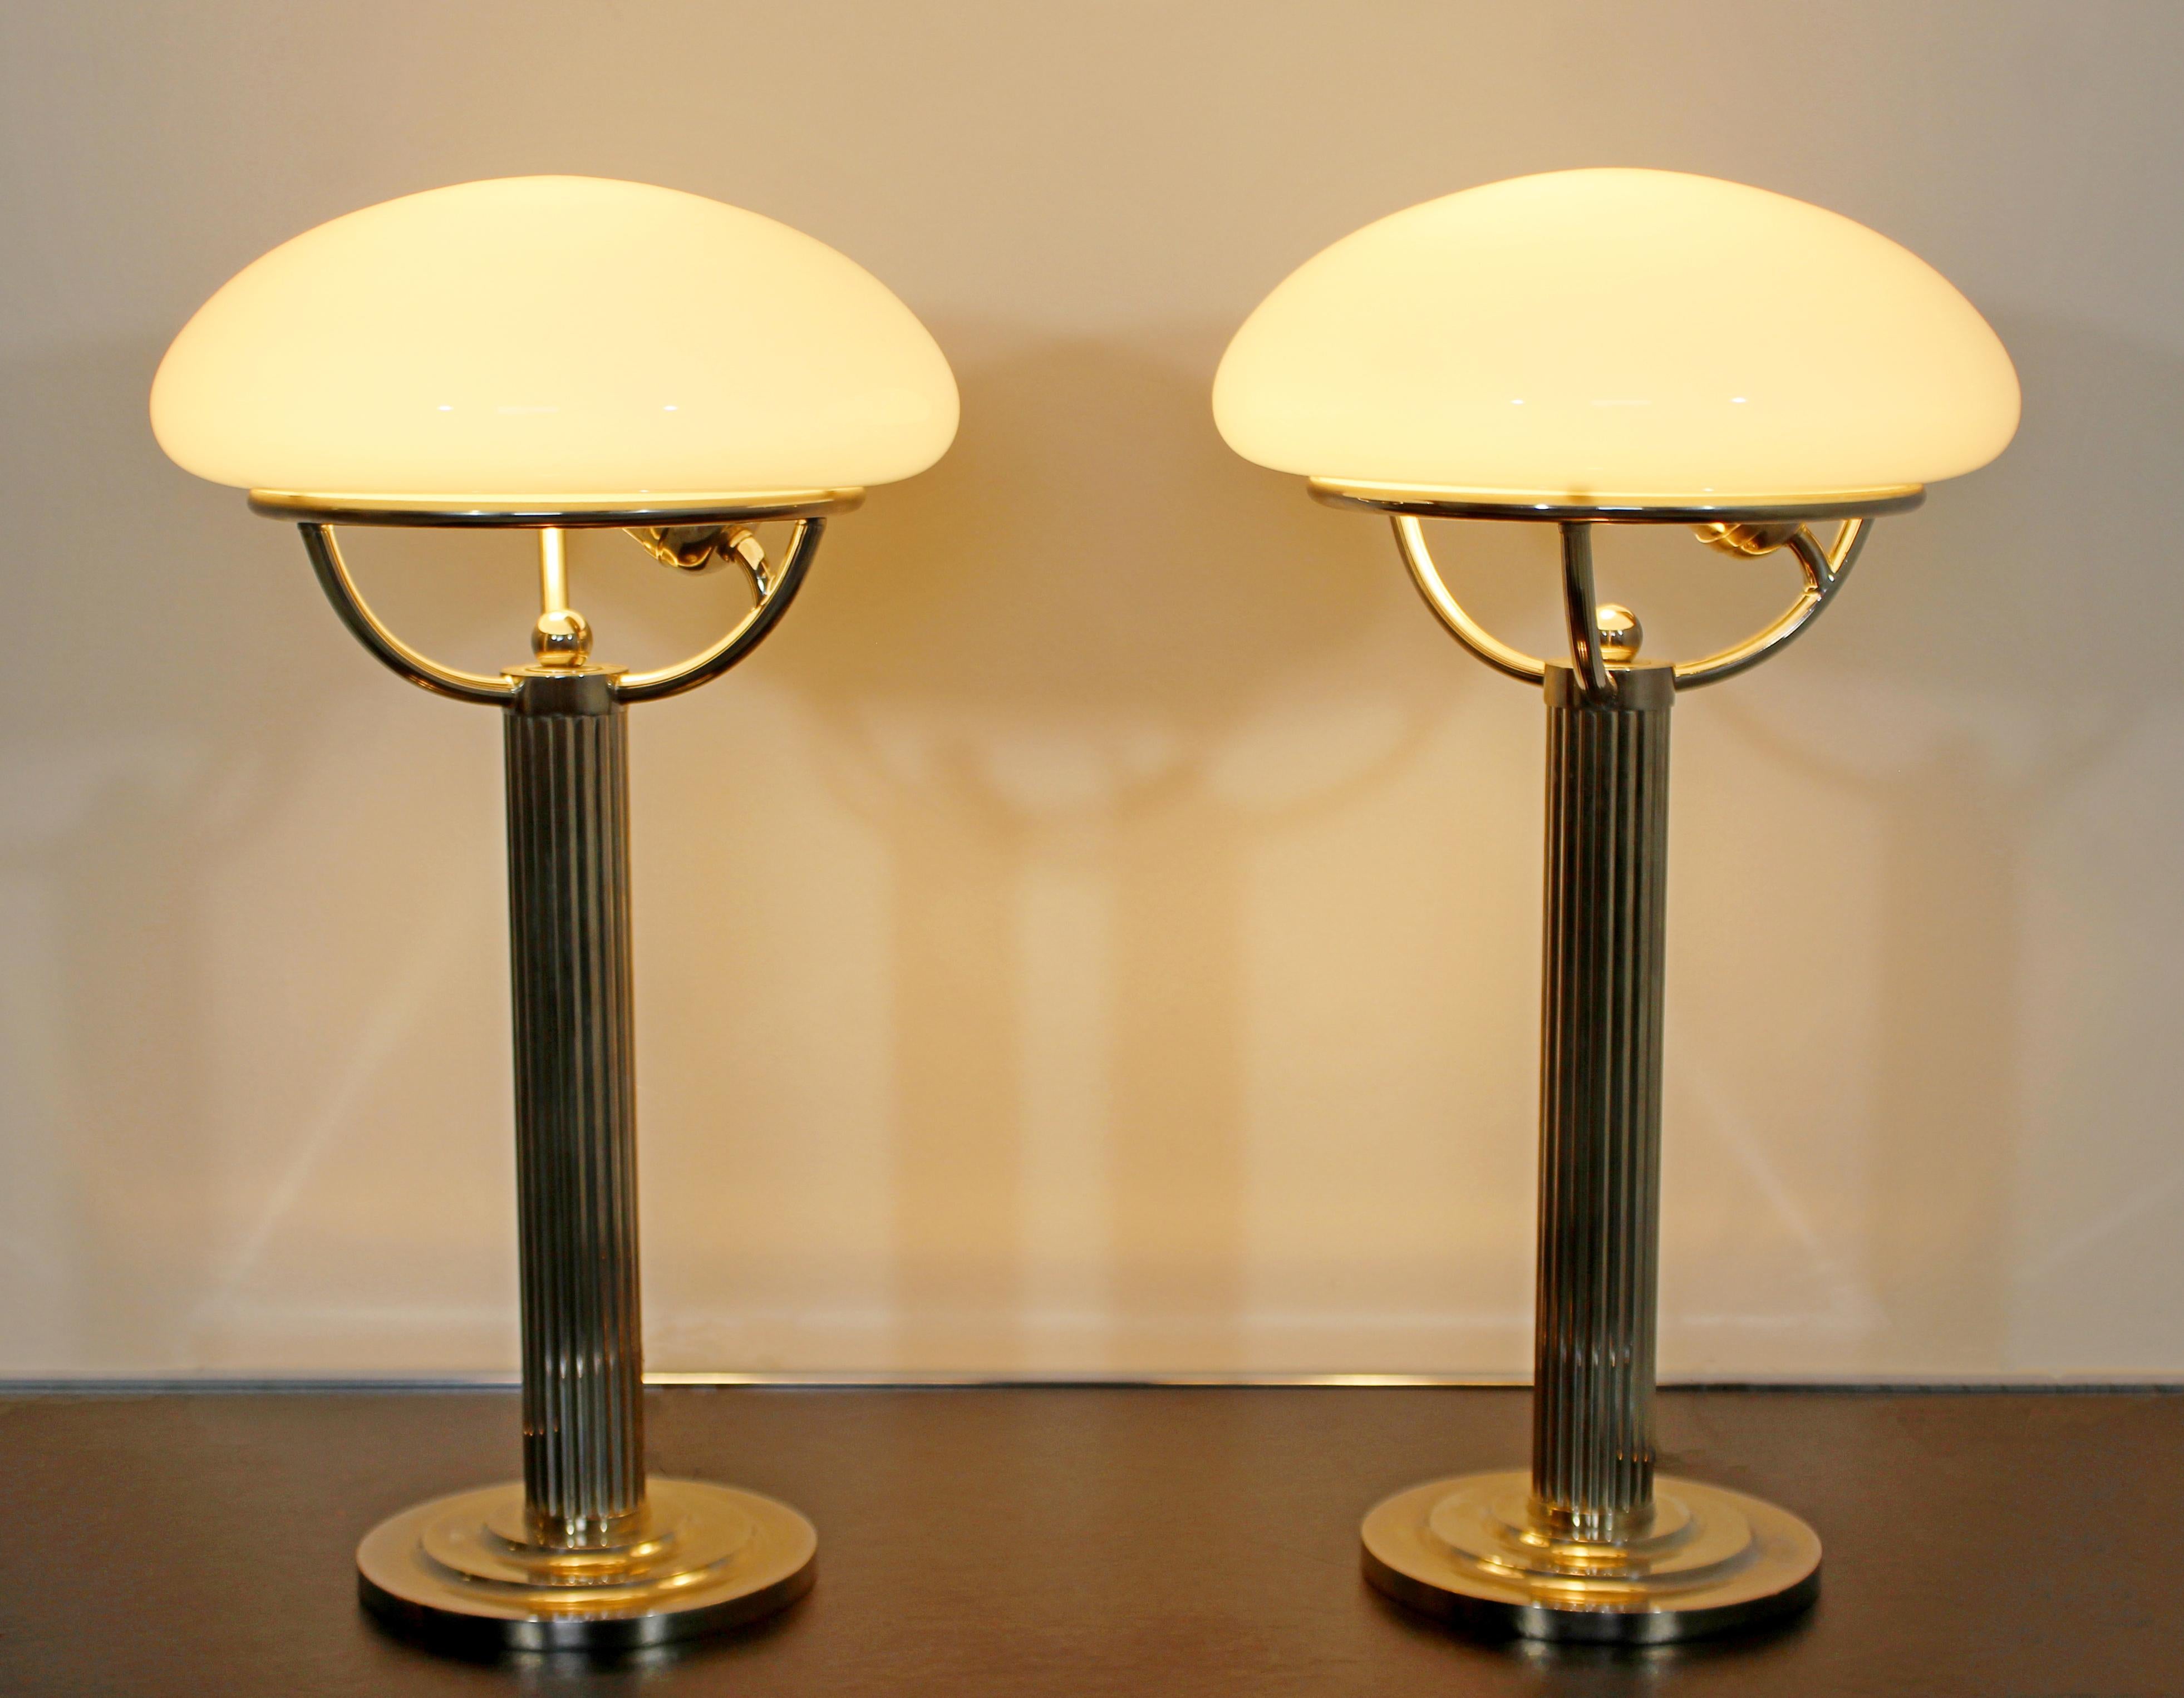 For your consideration is a marvelous pair of chrome table lamps, with glass shades, by Adolf Loos, made in Austria, circa 1910. In very good antique condition. The dimensions are 10